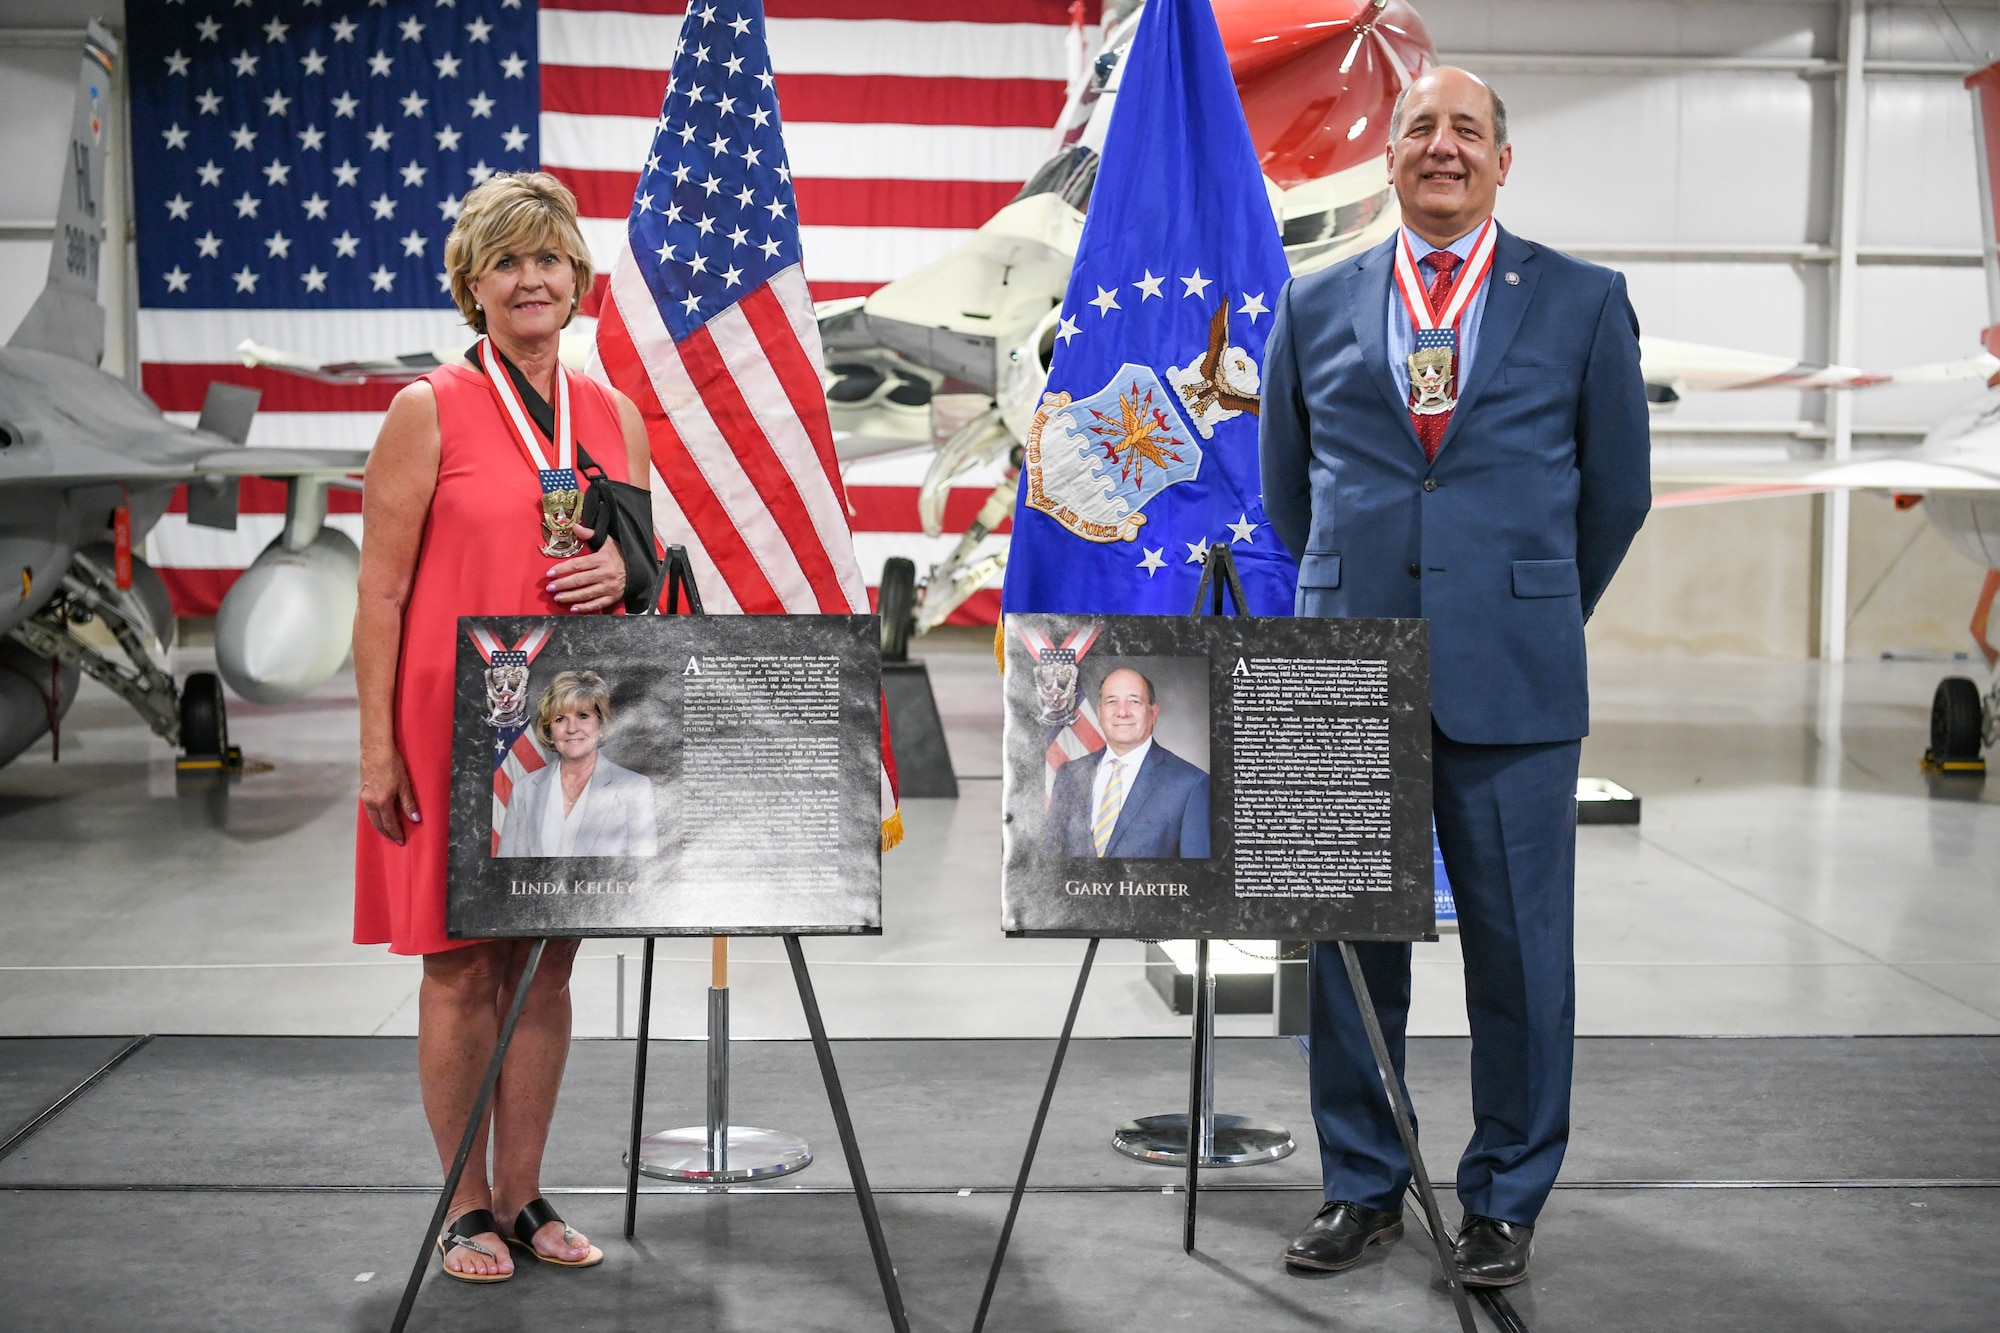 Linda Kelley and Gary Harter were awarded the Hill Air Force Base Community Wingman Award Sept. 10, 2020. The annual honor recognizes community members who have made a significant service contribution to the installation. (U.S. Air Force photo by Cynthia Griggs)